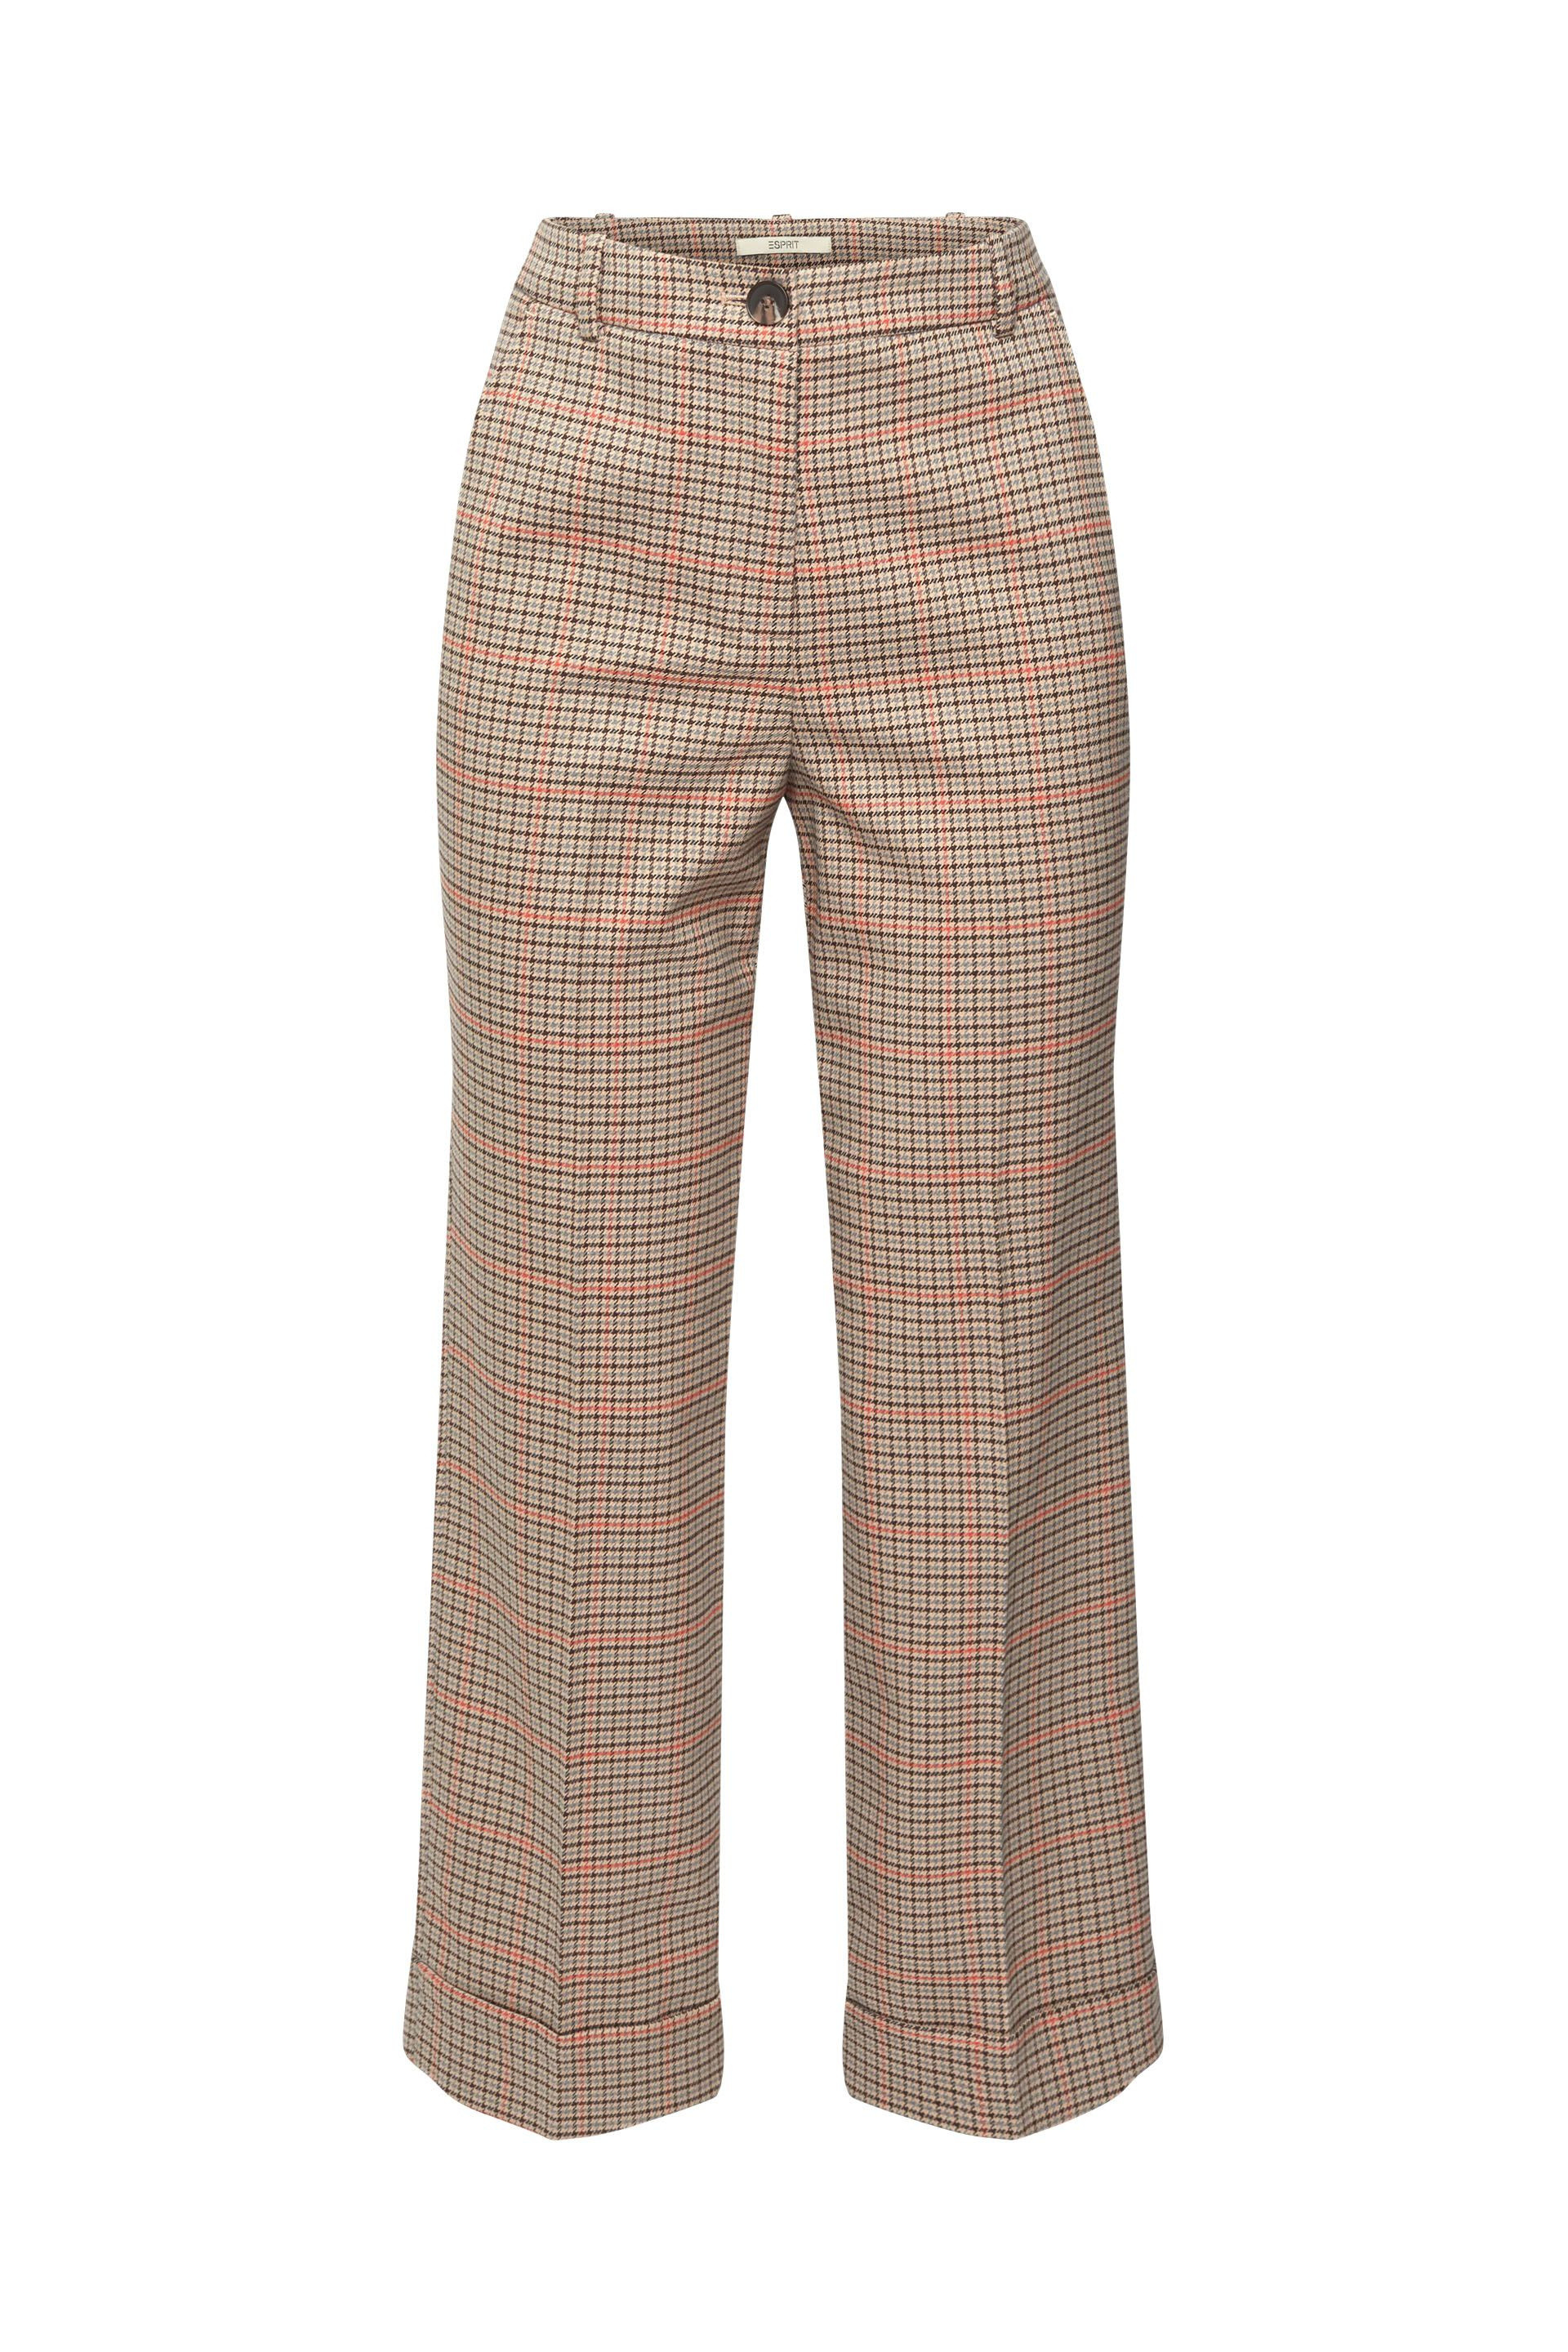 Trousers with a checked pattern, Beige, large image number 0